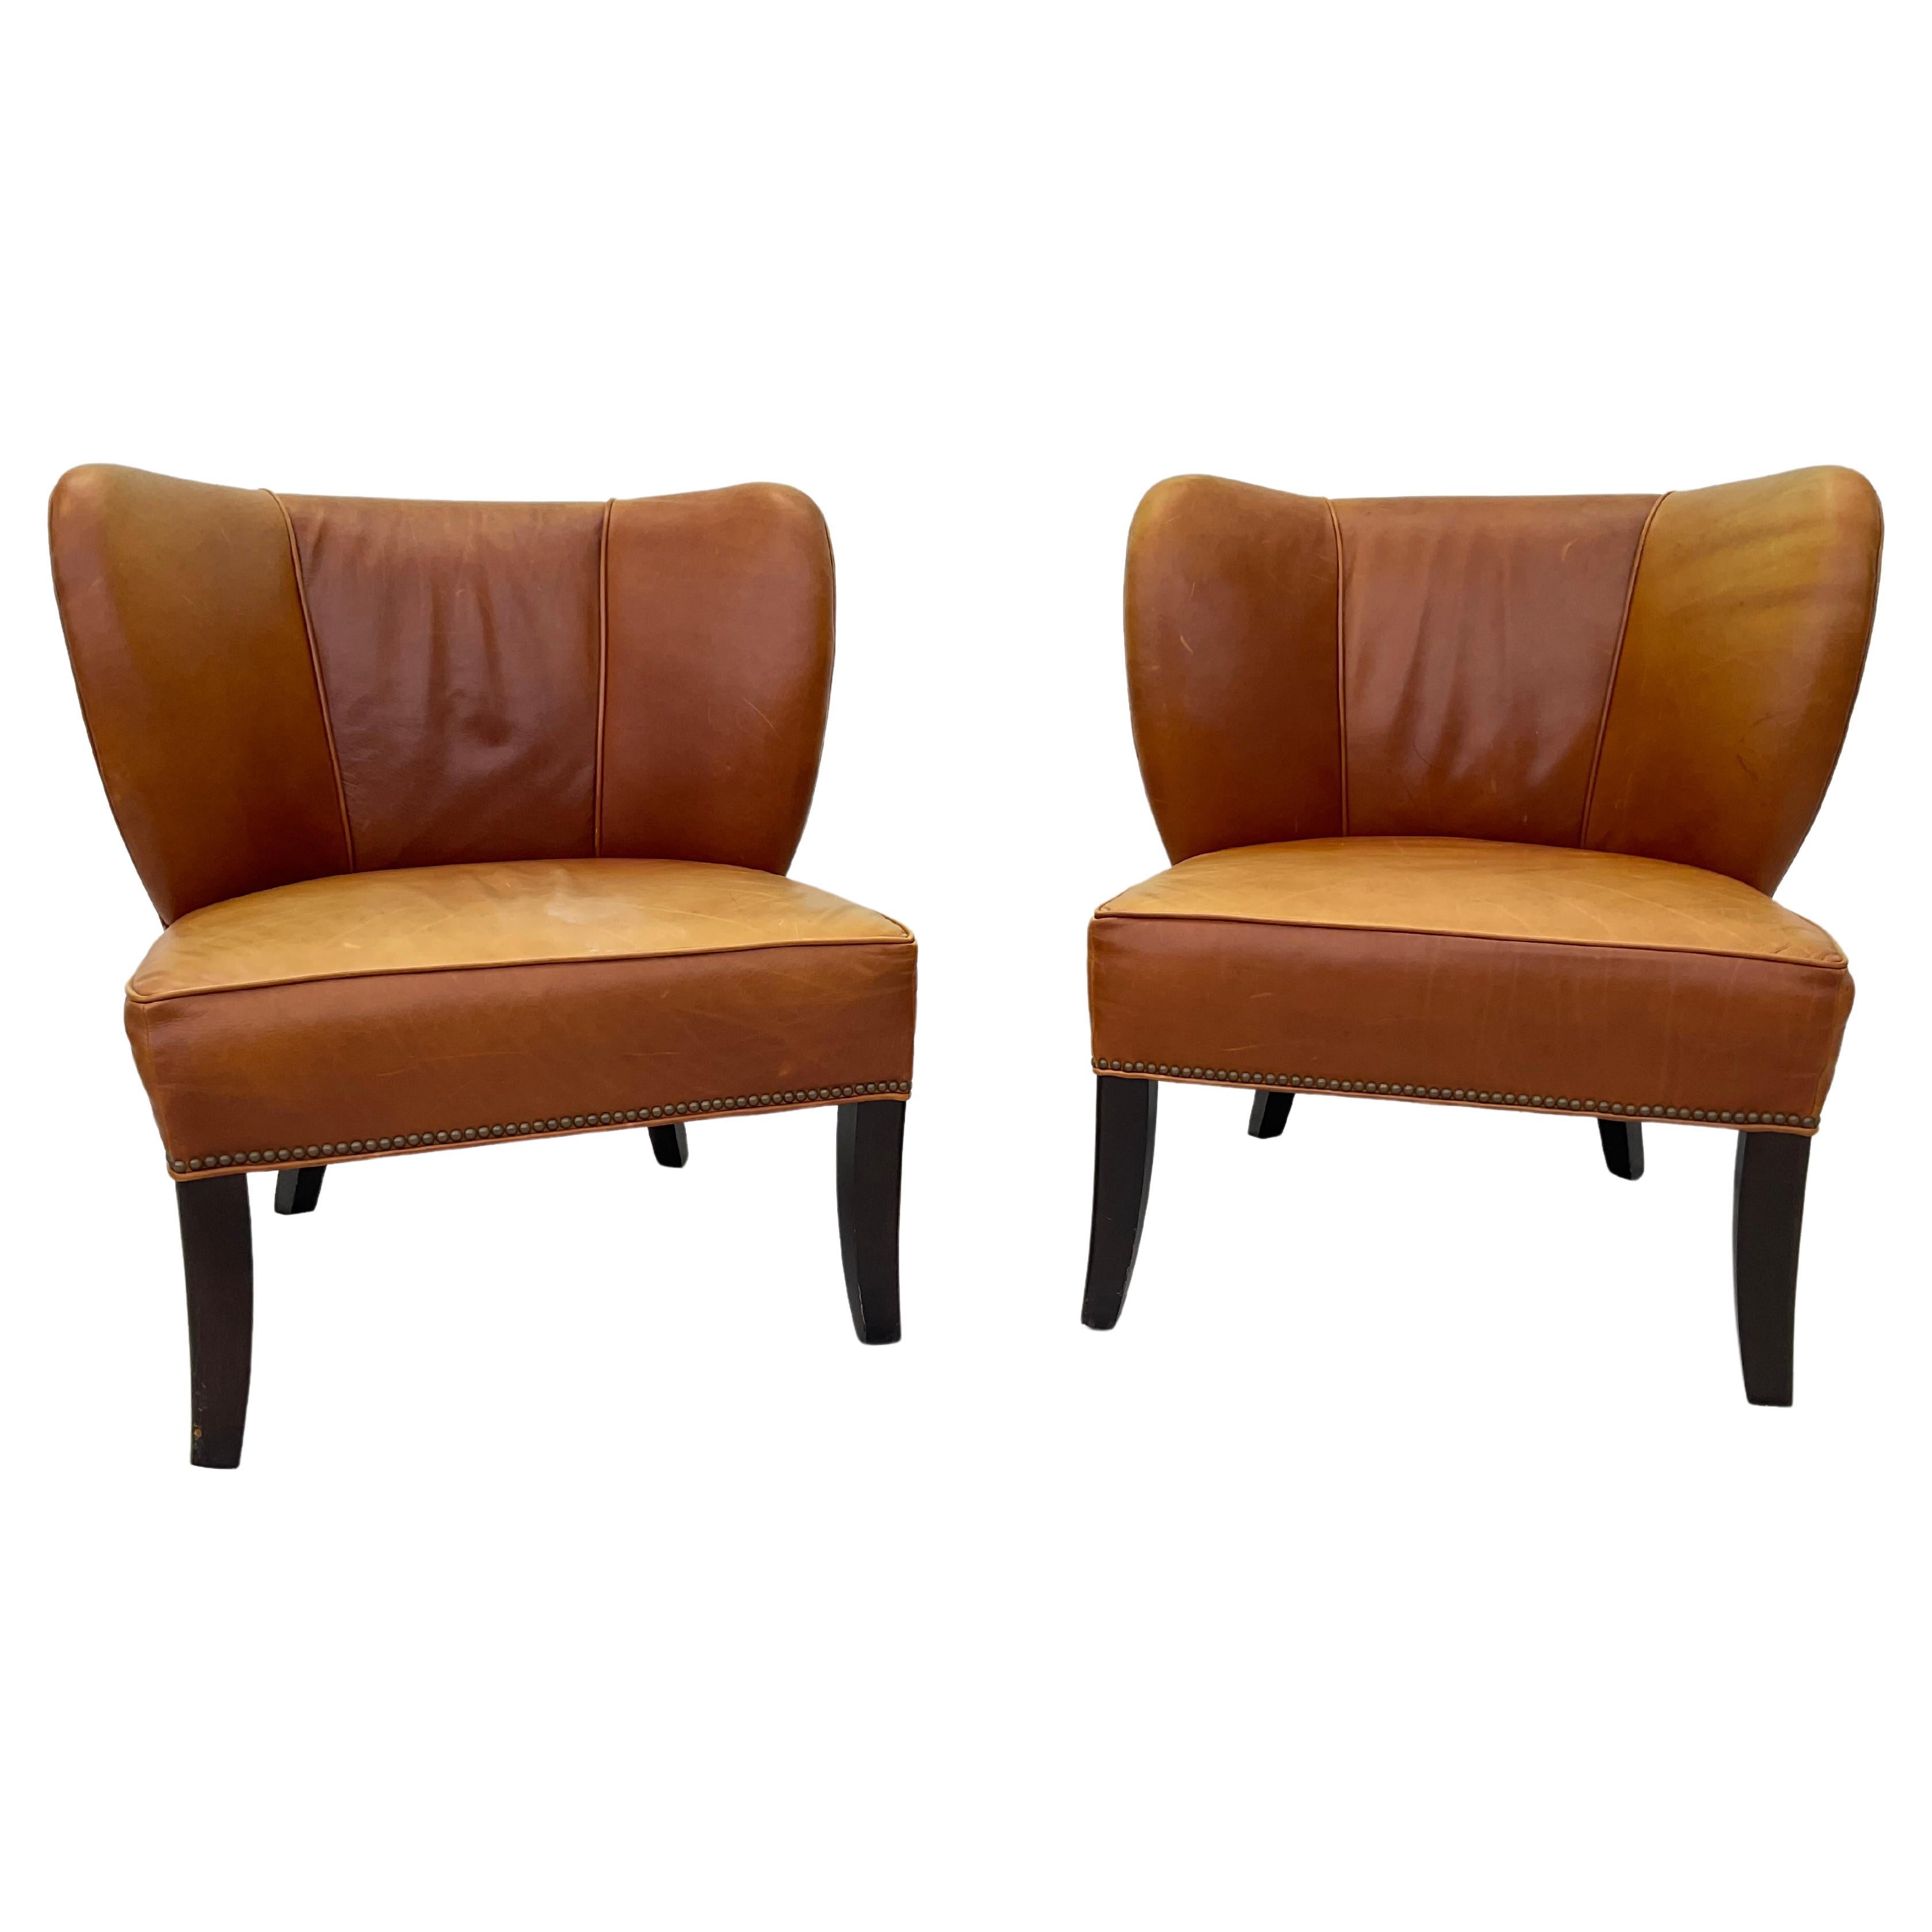 Modern Pair Of Arhaus Italian Leather Lounge Chairs For Sale